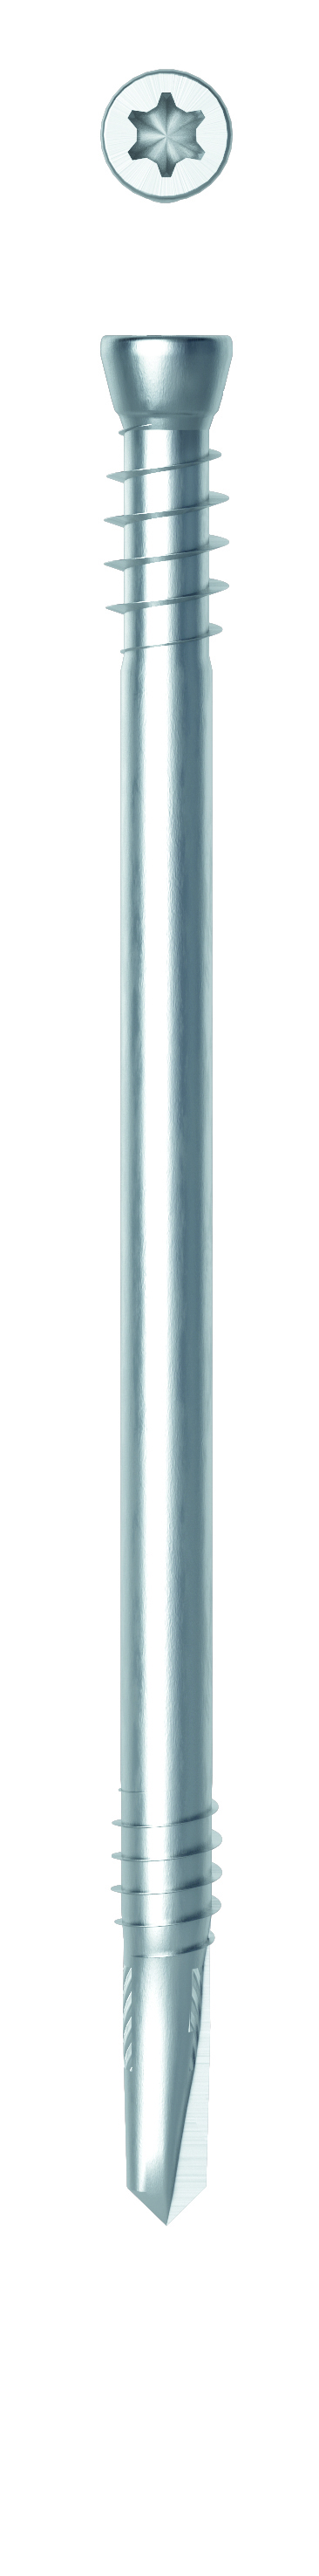 Self tapping dowels